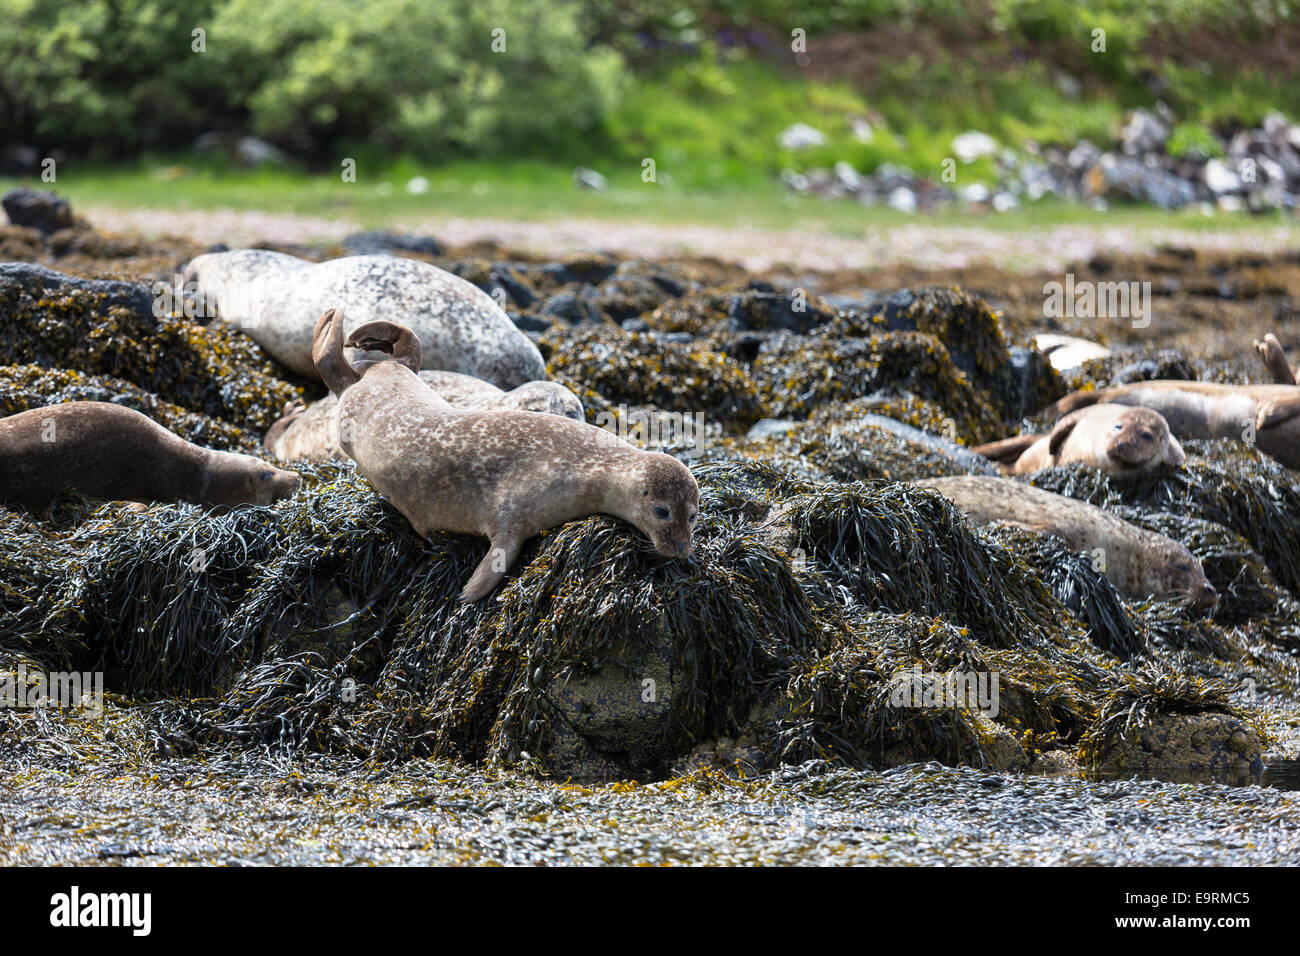 Common Seal or Harbour Seal, Phoca vitulina, colony of adults and juveniles basking on rocks and seaweed by Dunvegan Loch, Isle Stock Photo